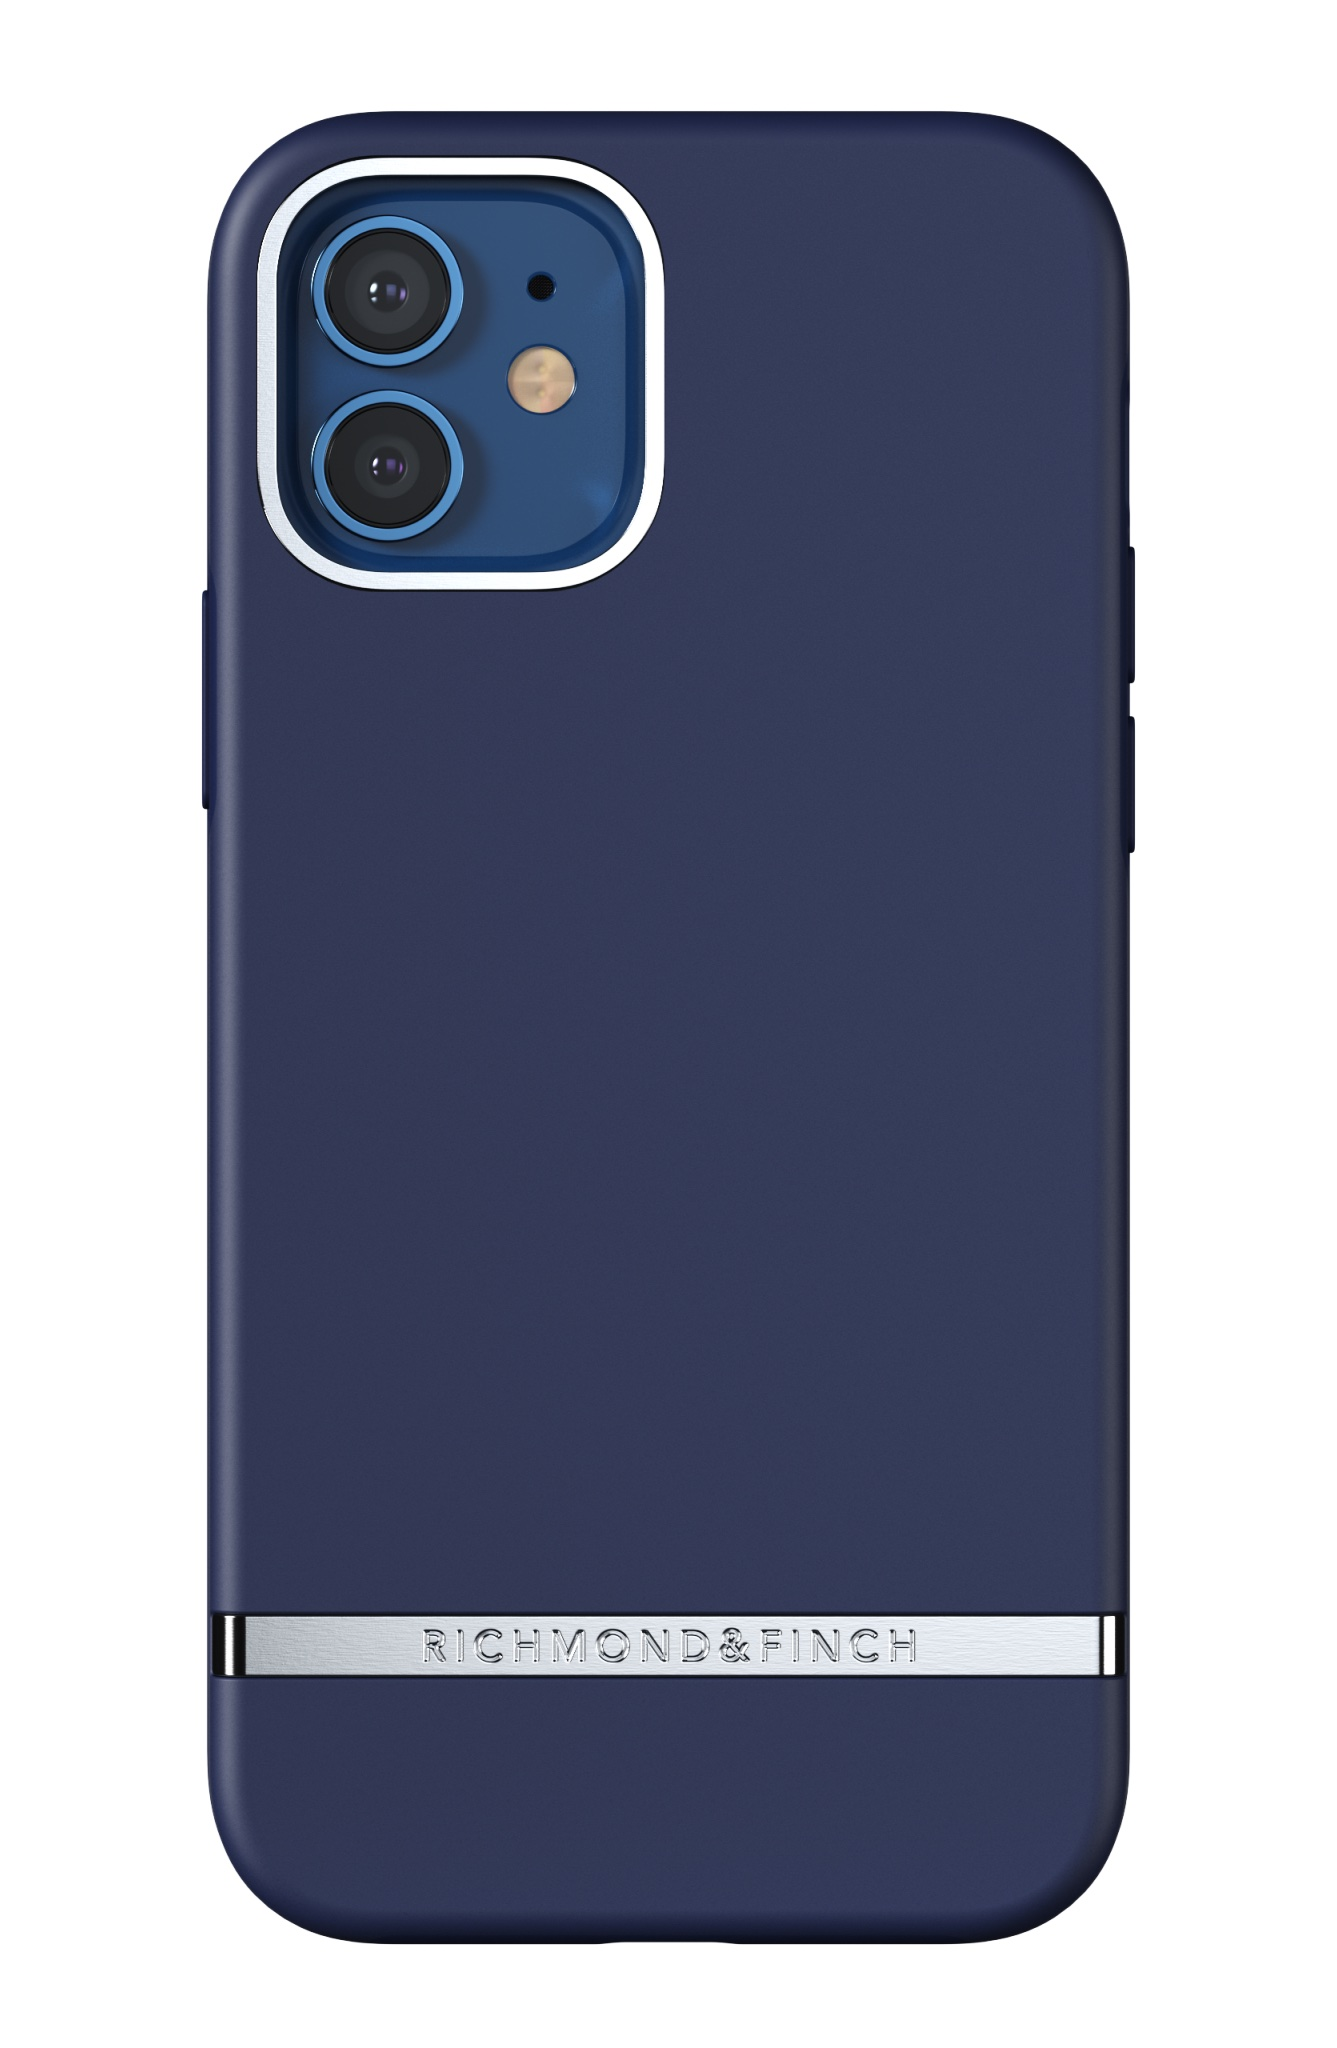 iPhone 12 12 FINCH BLUE APPLE, & & Backcover, Pro, 12 IPHONE PRO, Navy RICHMOND